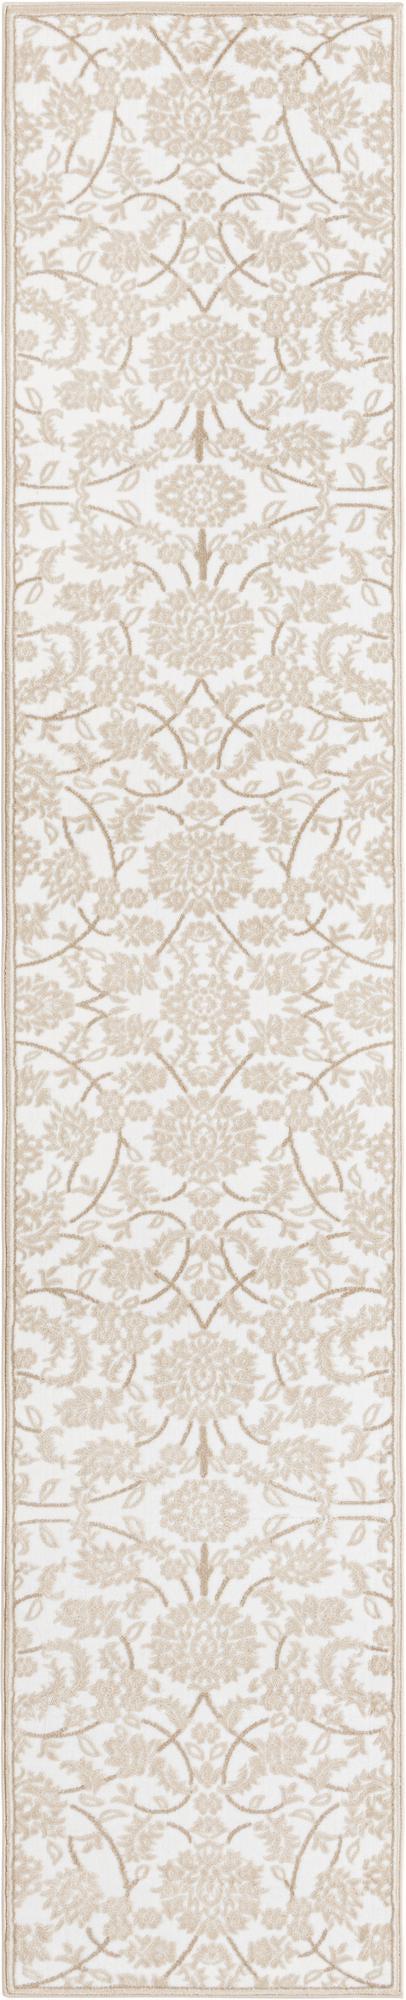 rugpal keystone country & floral area rug collection